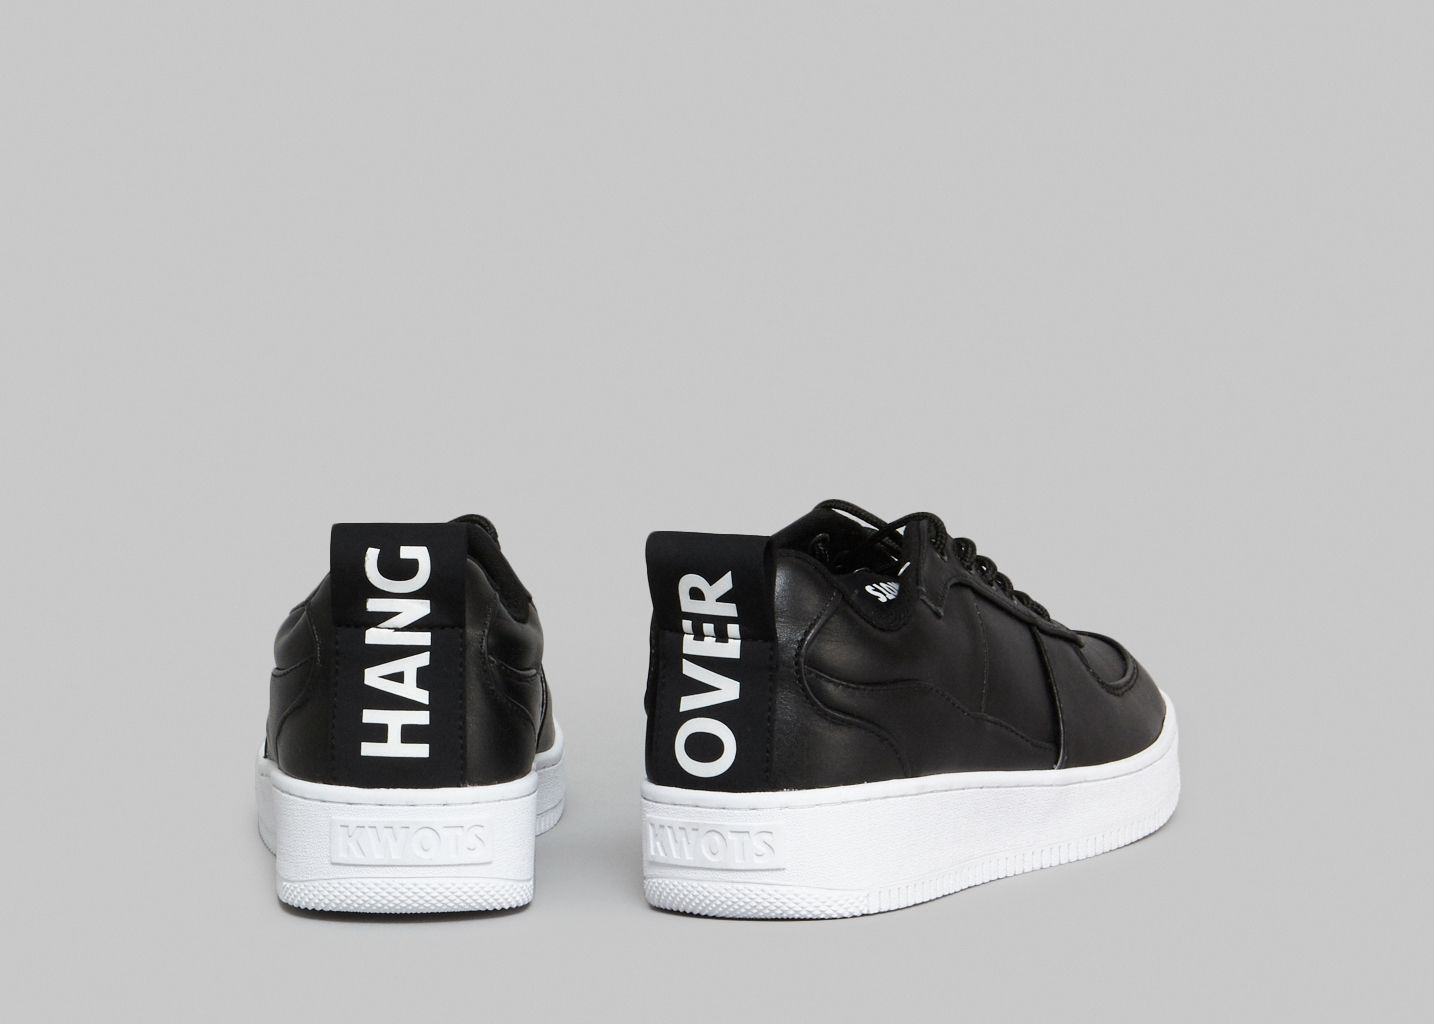 Sneakers Master Hang/Over - Kwots